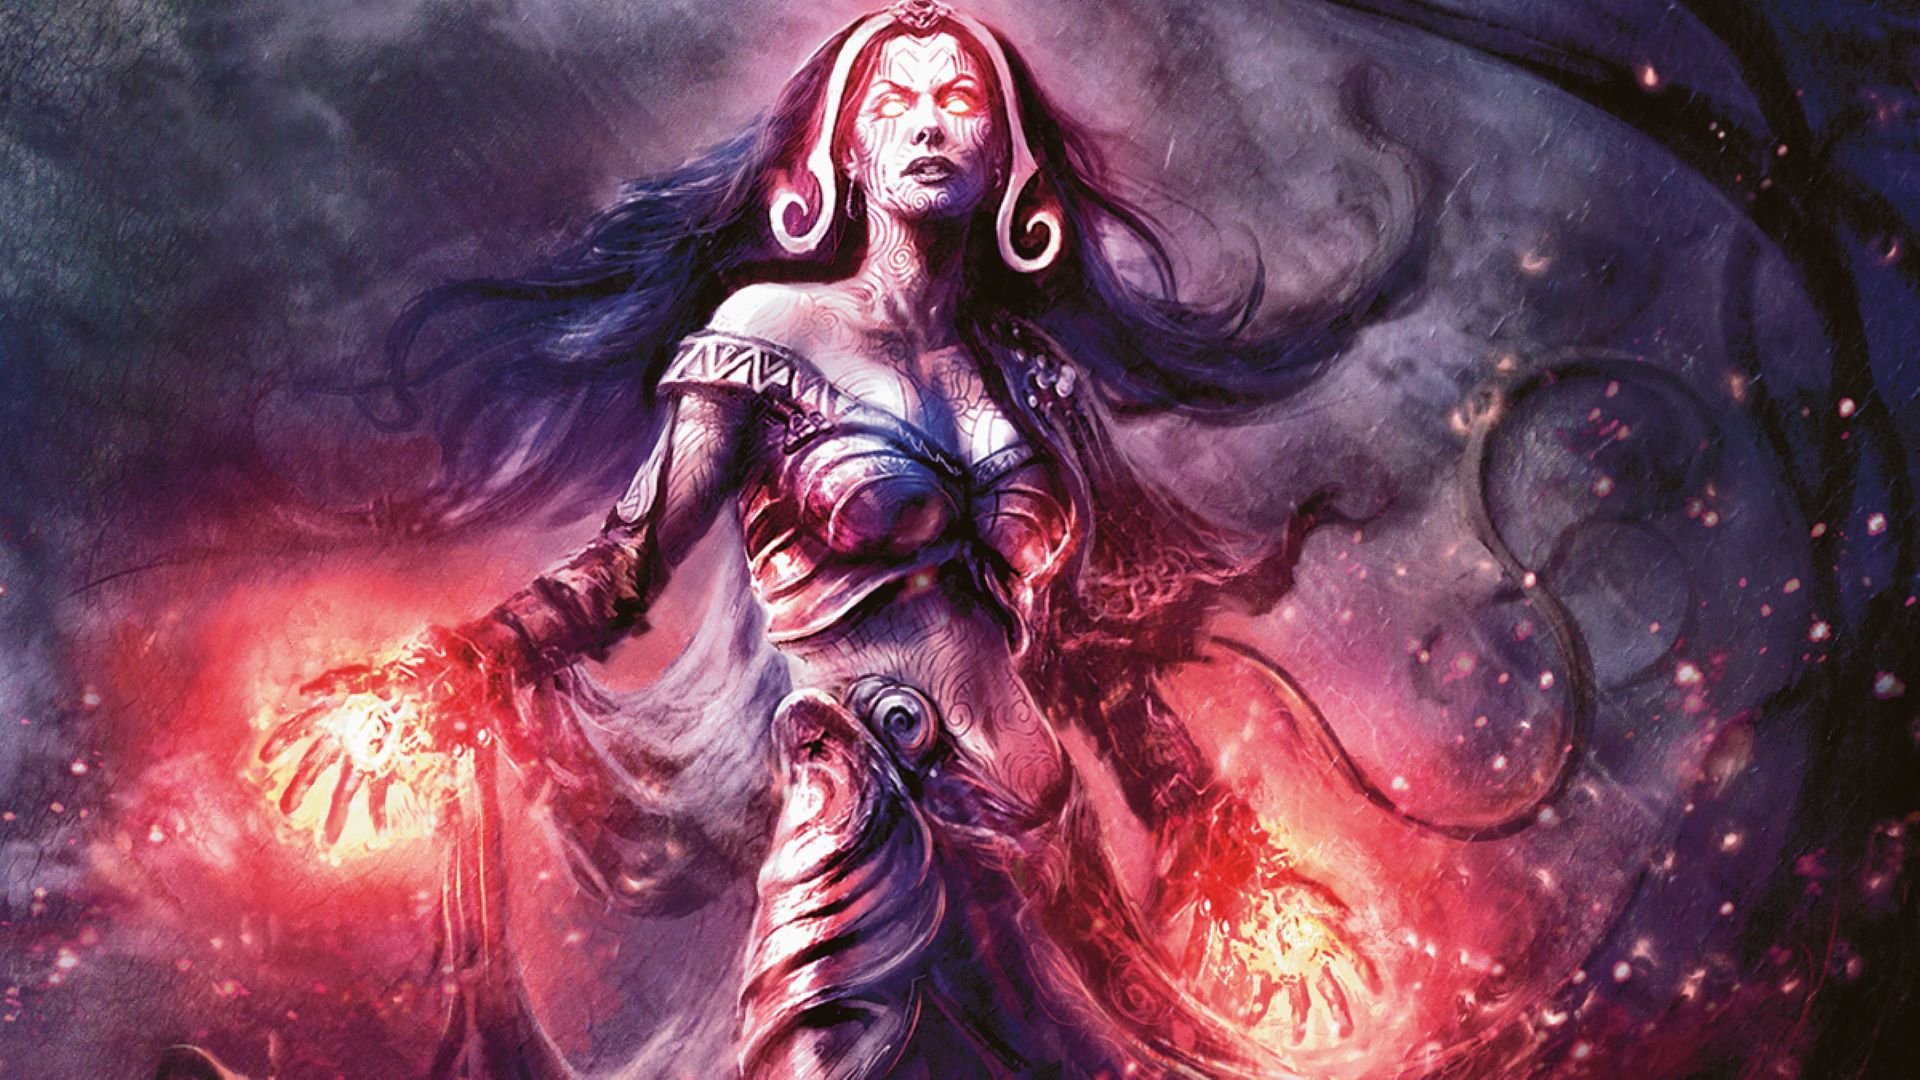 MTG Liliana Vess guide - Wizards of the Coast artwork showing Liliana Vess casting magic with both hands